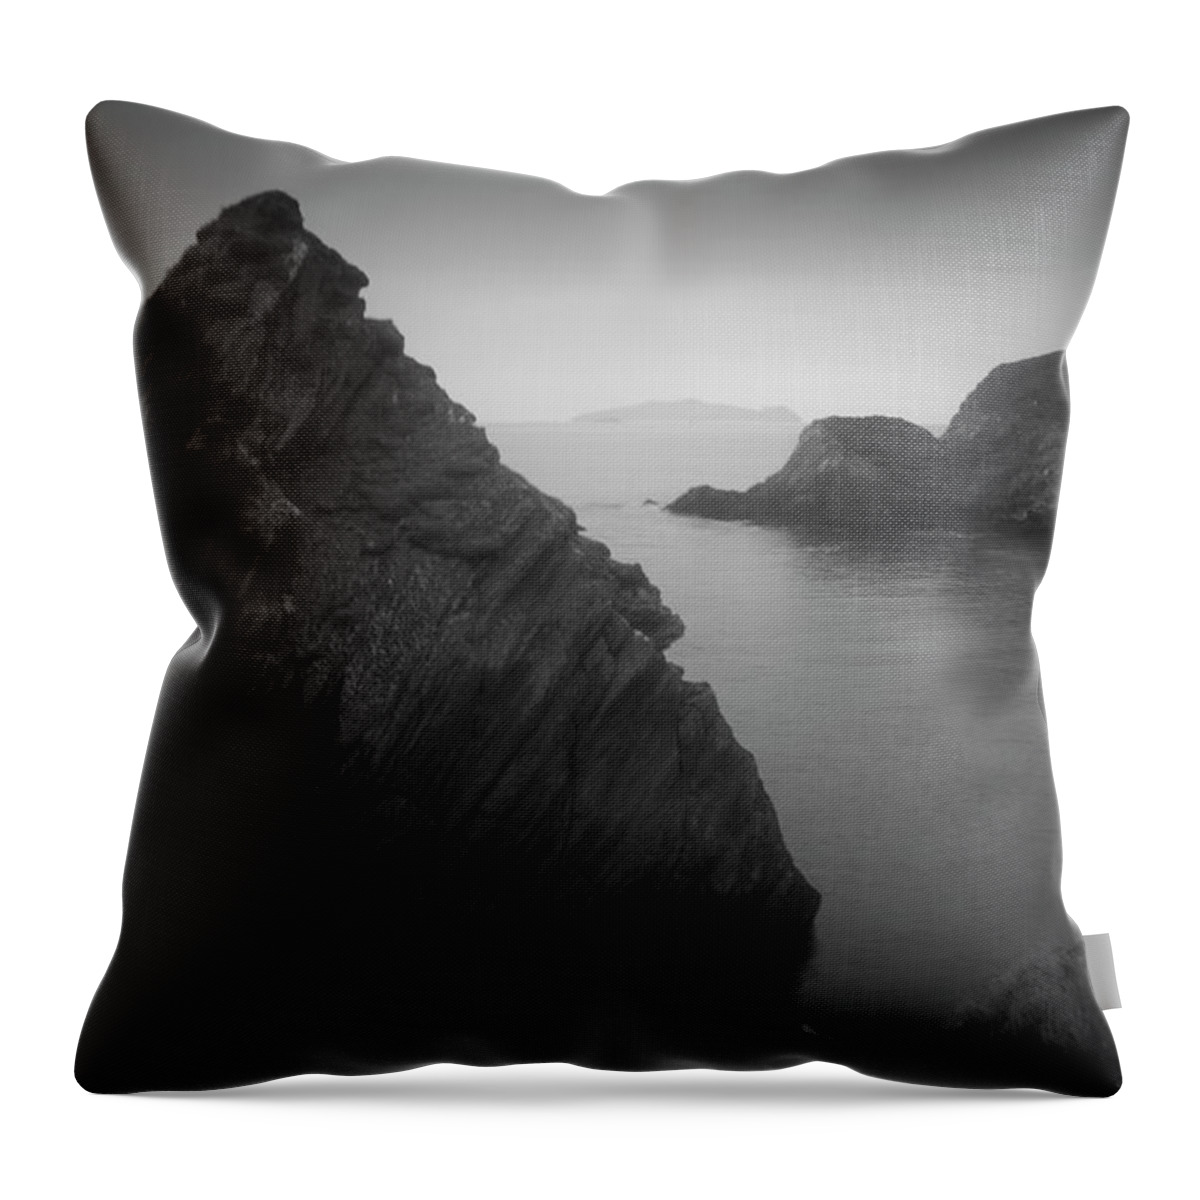 Moody Throw Pillow featuring the photograph Moody Monolith by Mark Callanan